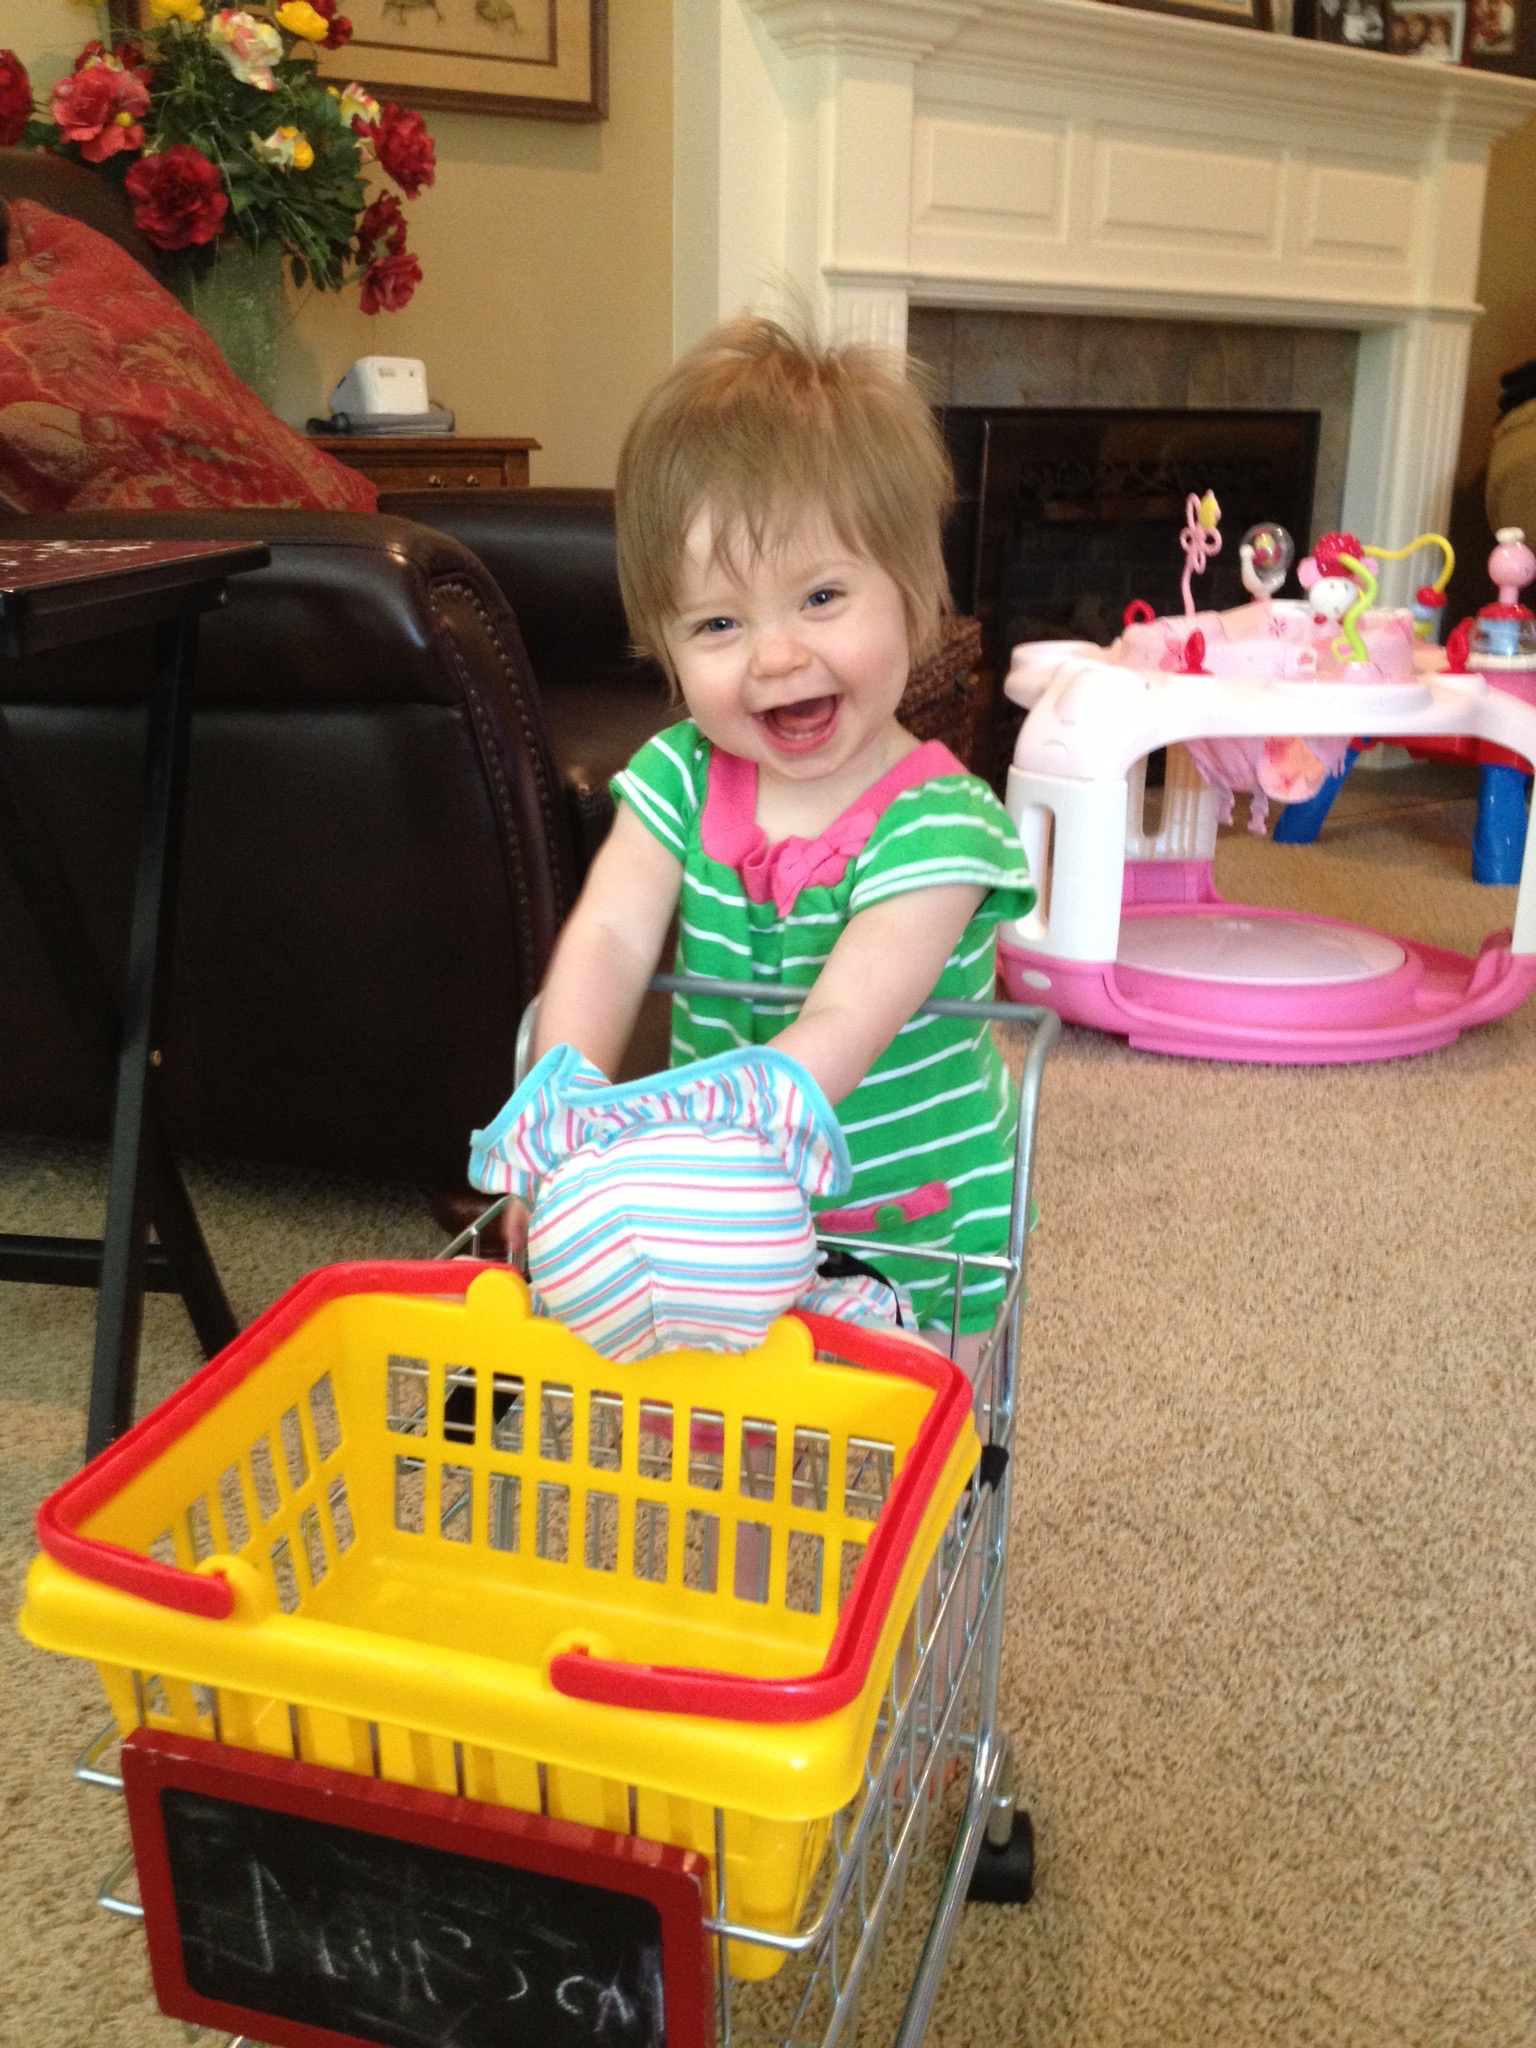 A smiling young girl pushes a toy plastic cart.